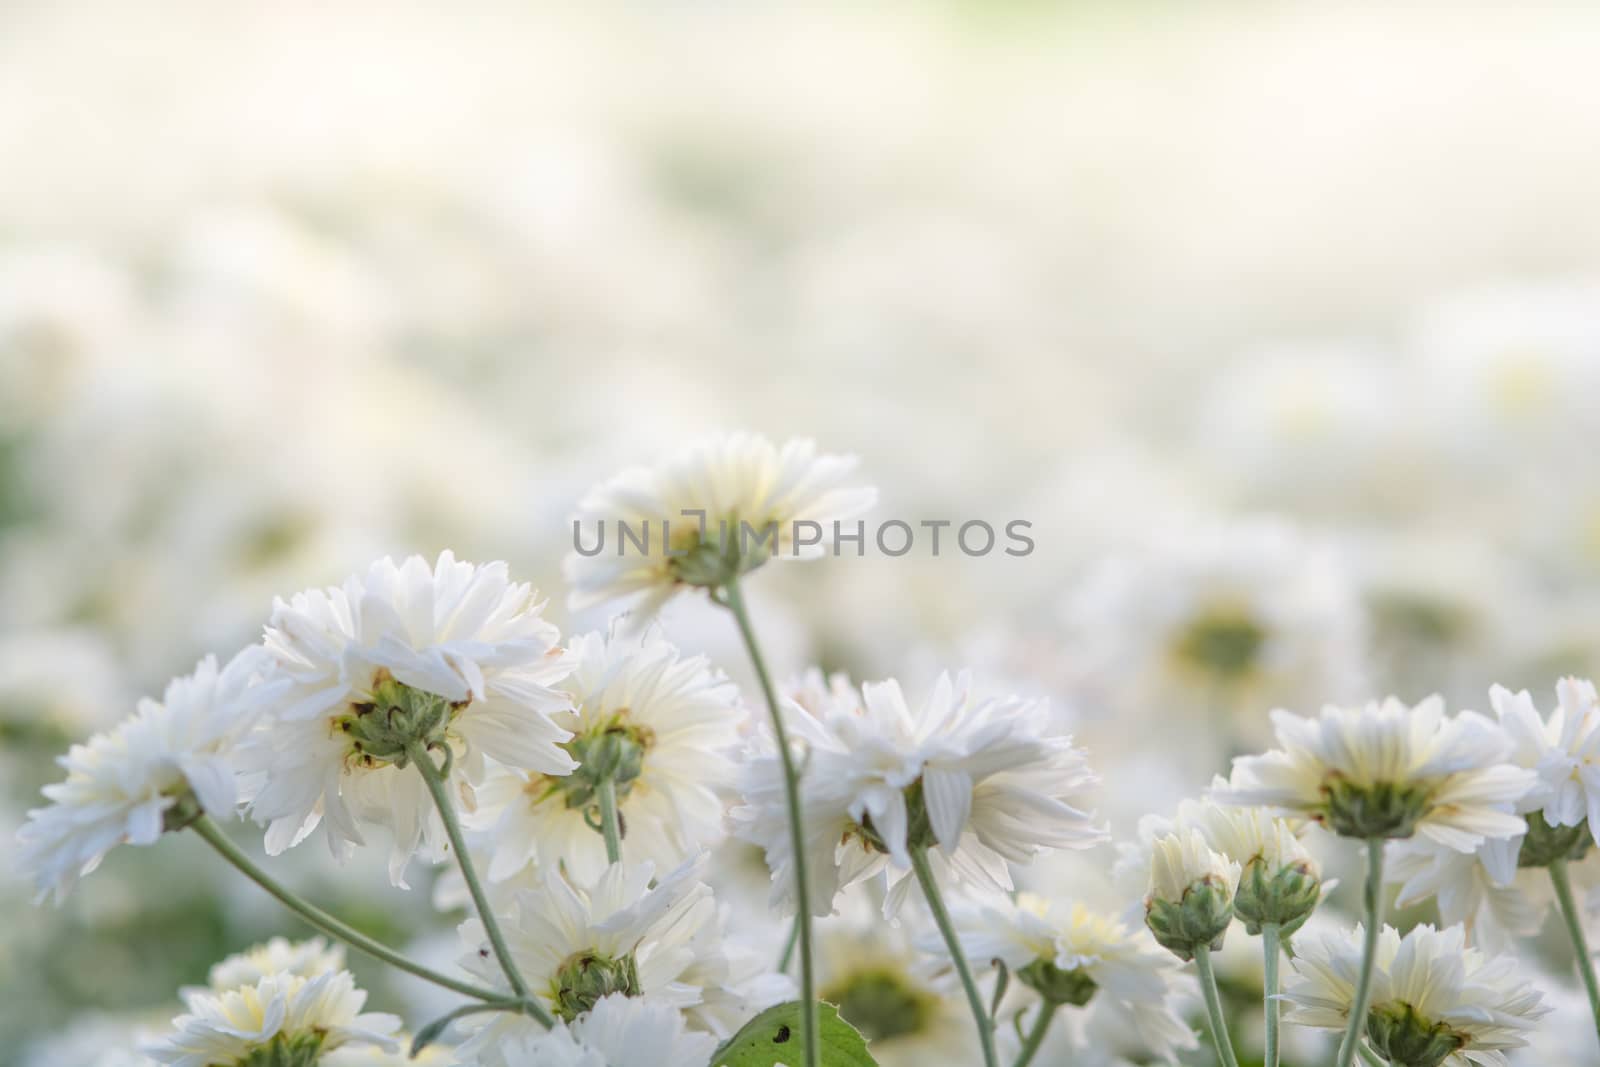 chrysanthemum in the garden. Blurry flower for background, colorful plants